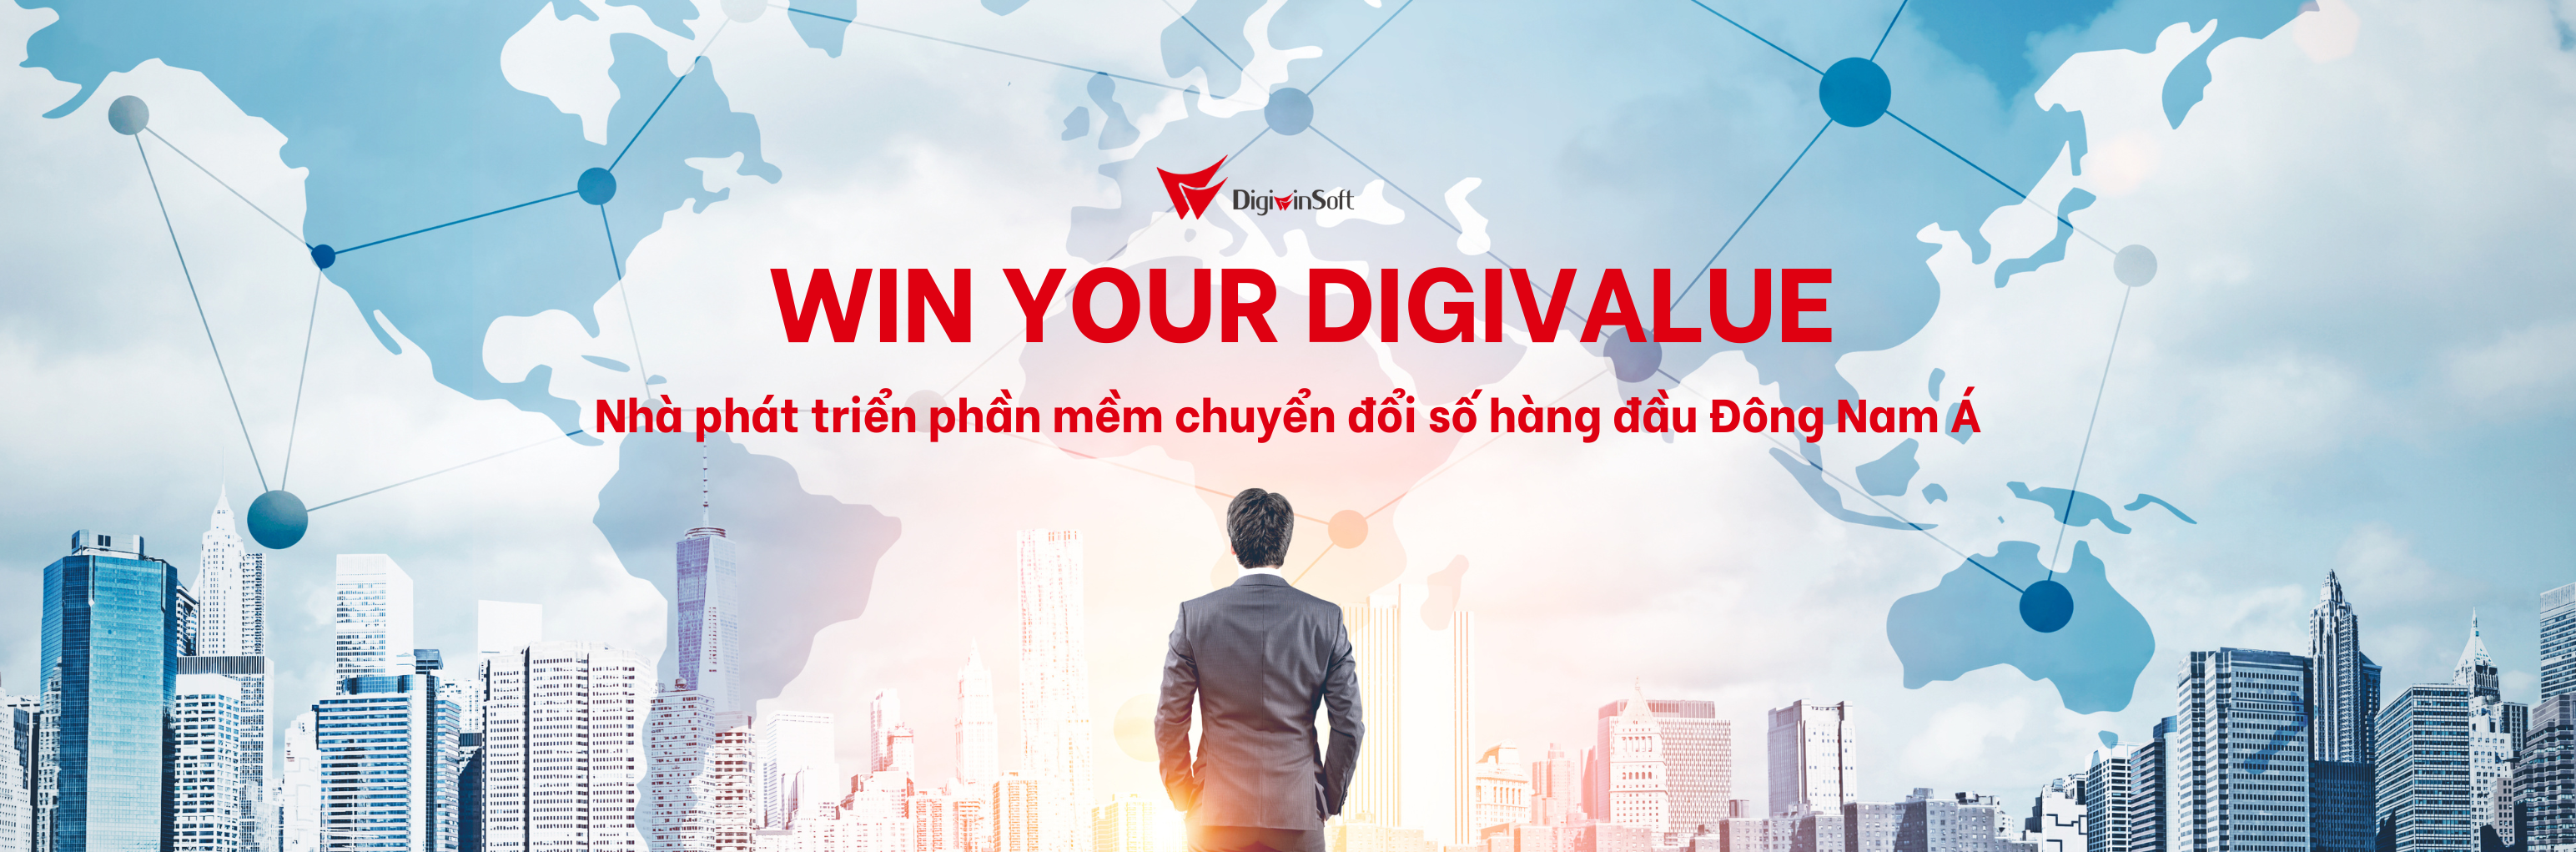 Digiwin-Win Your DigiValue